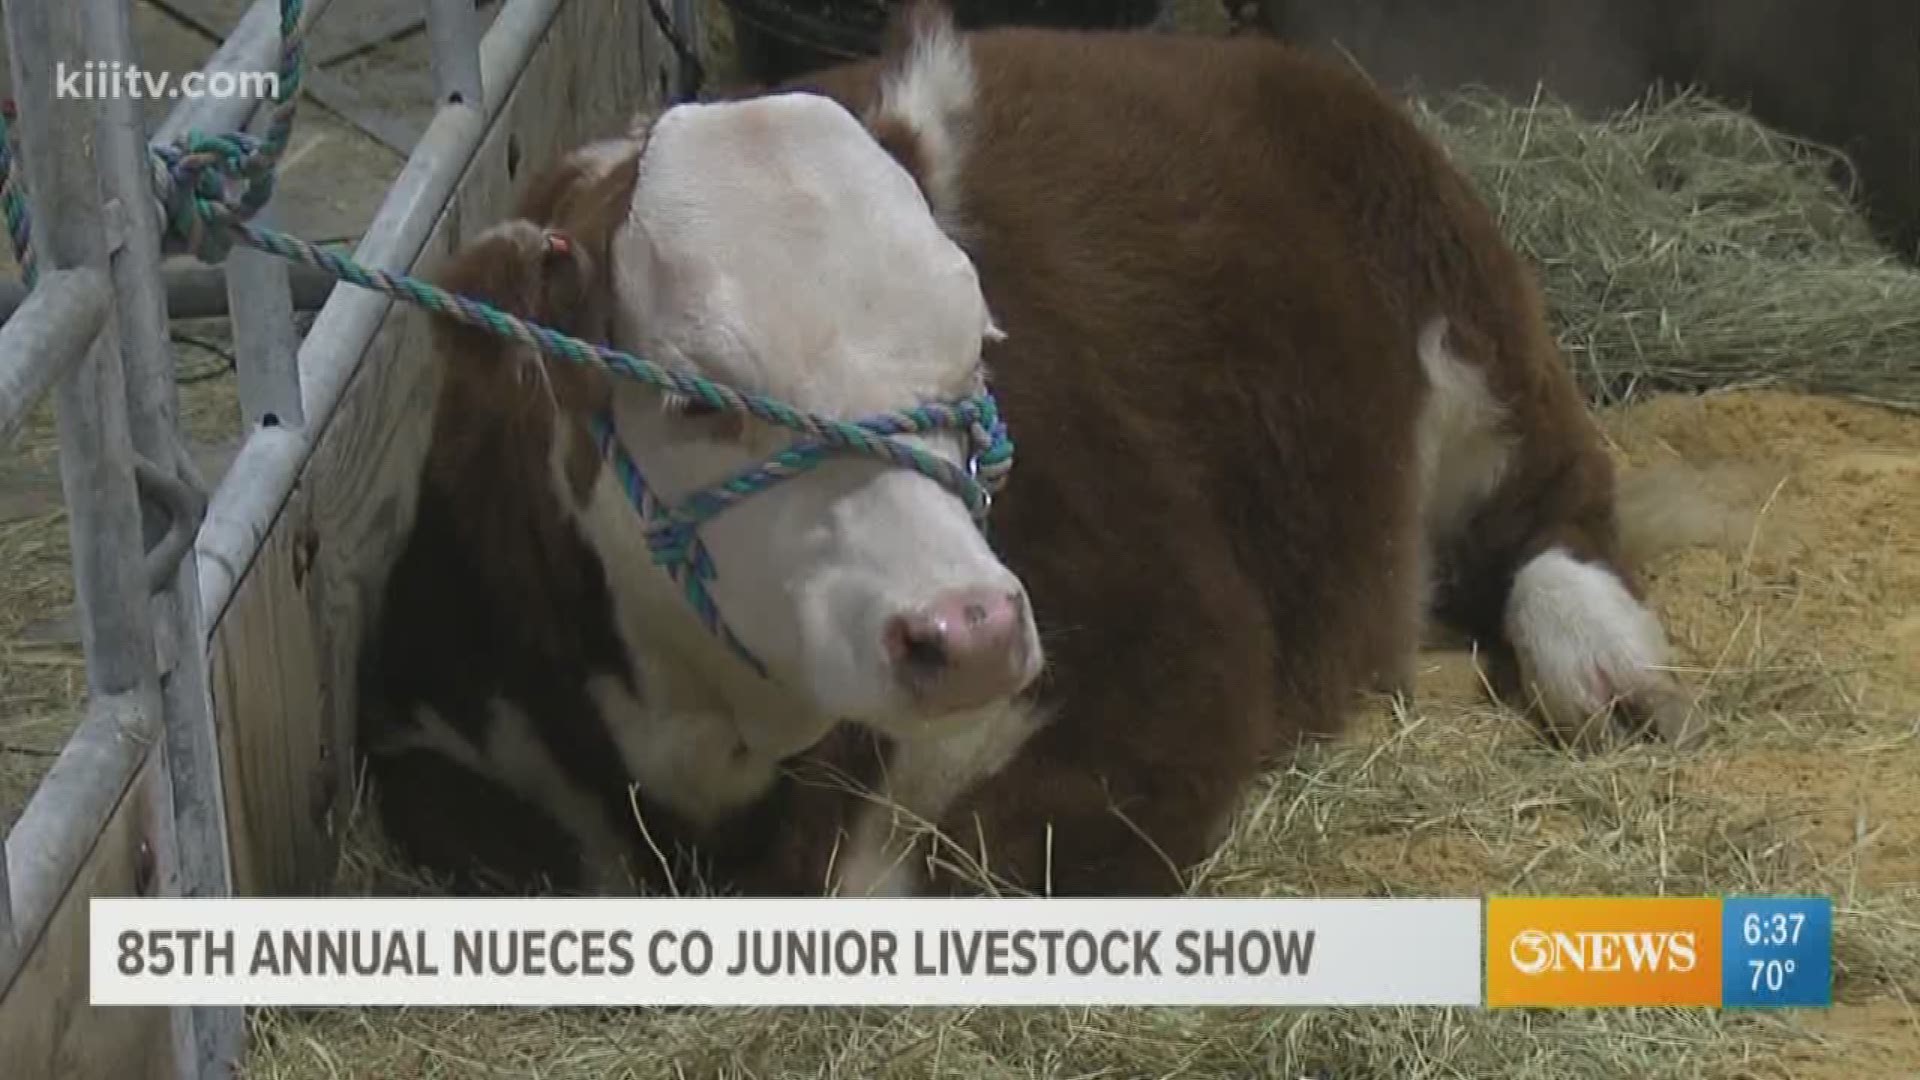 The Livestock Show is a big part of the community, and the Grand Champion Steer can sometimes sell for up to $20,000 when it is all said and done.